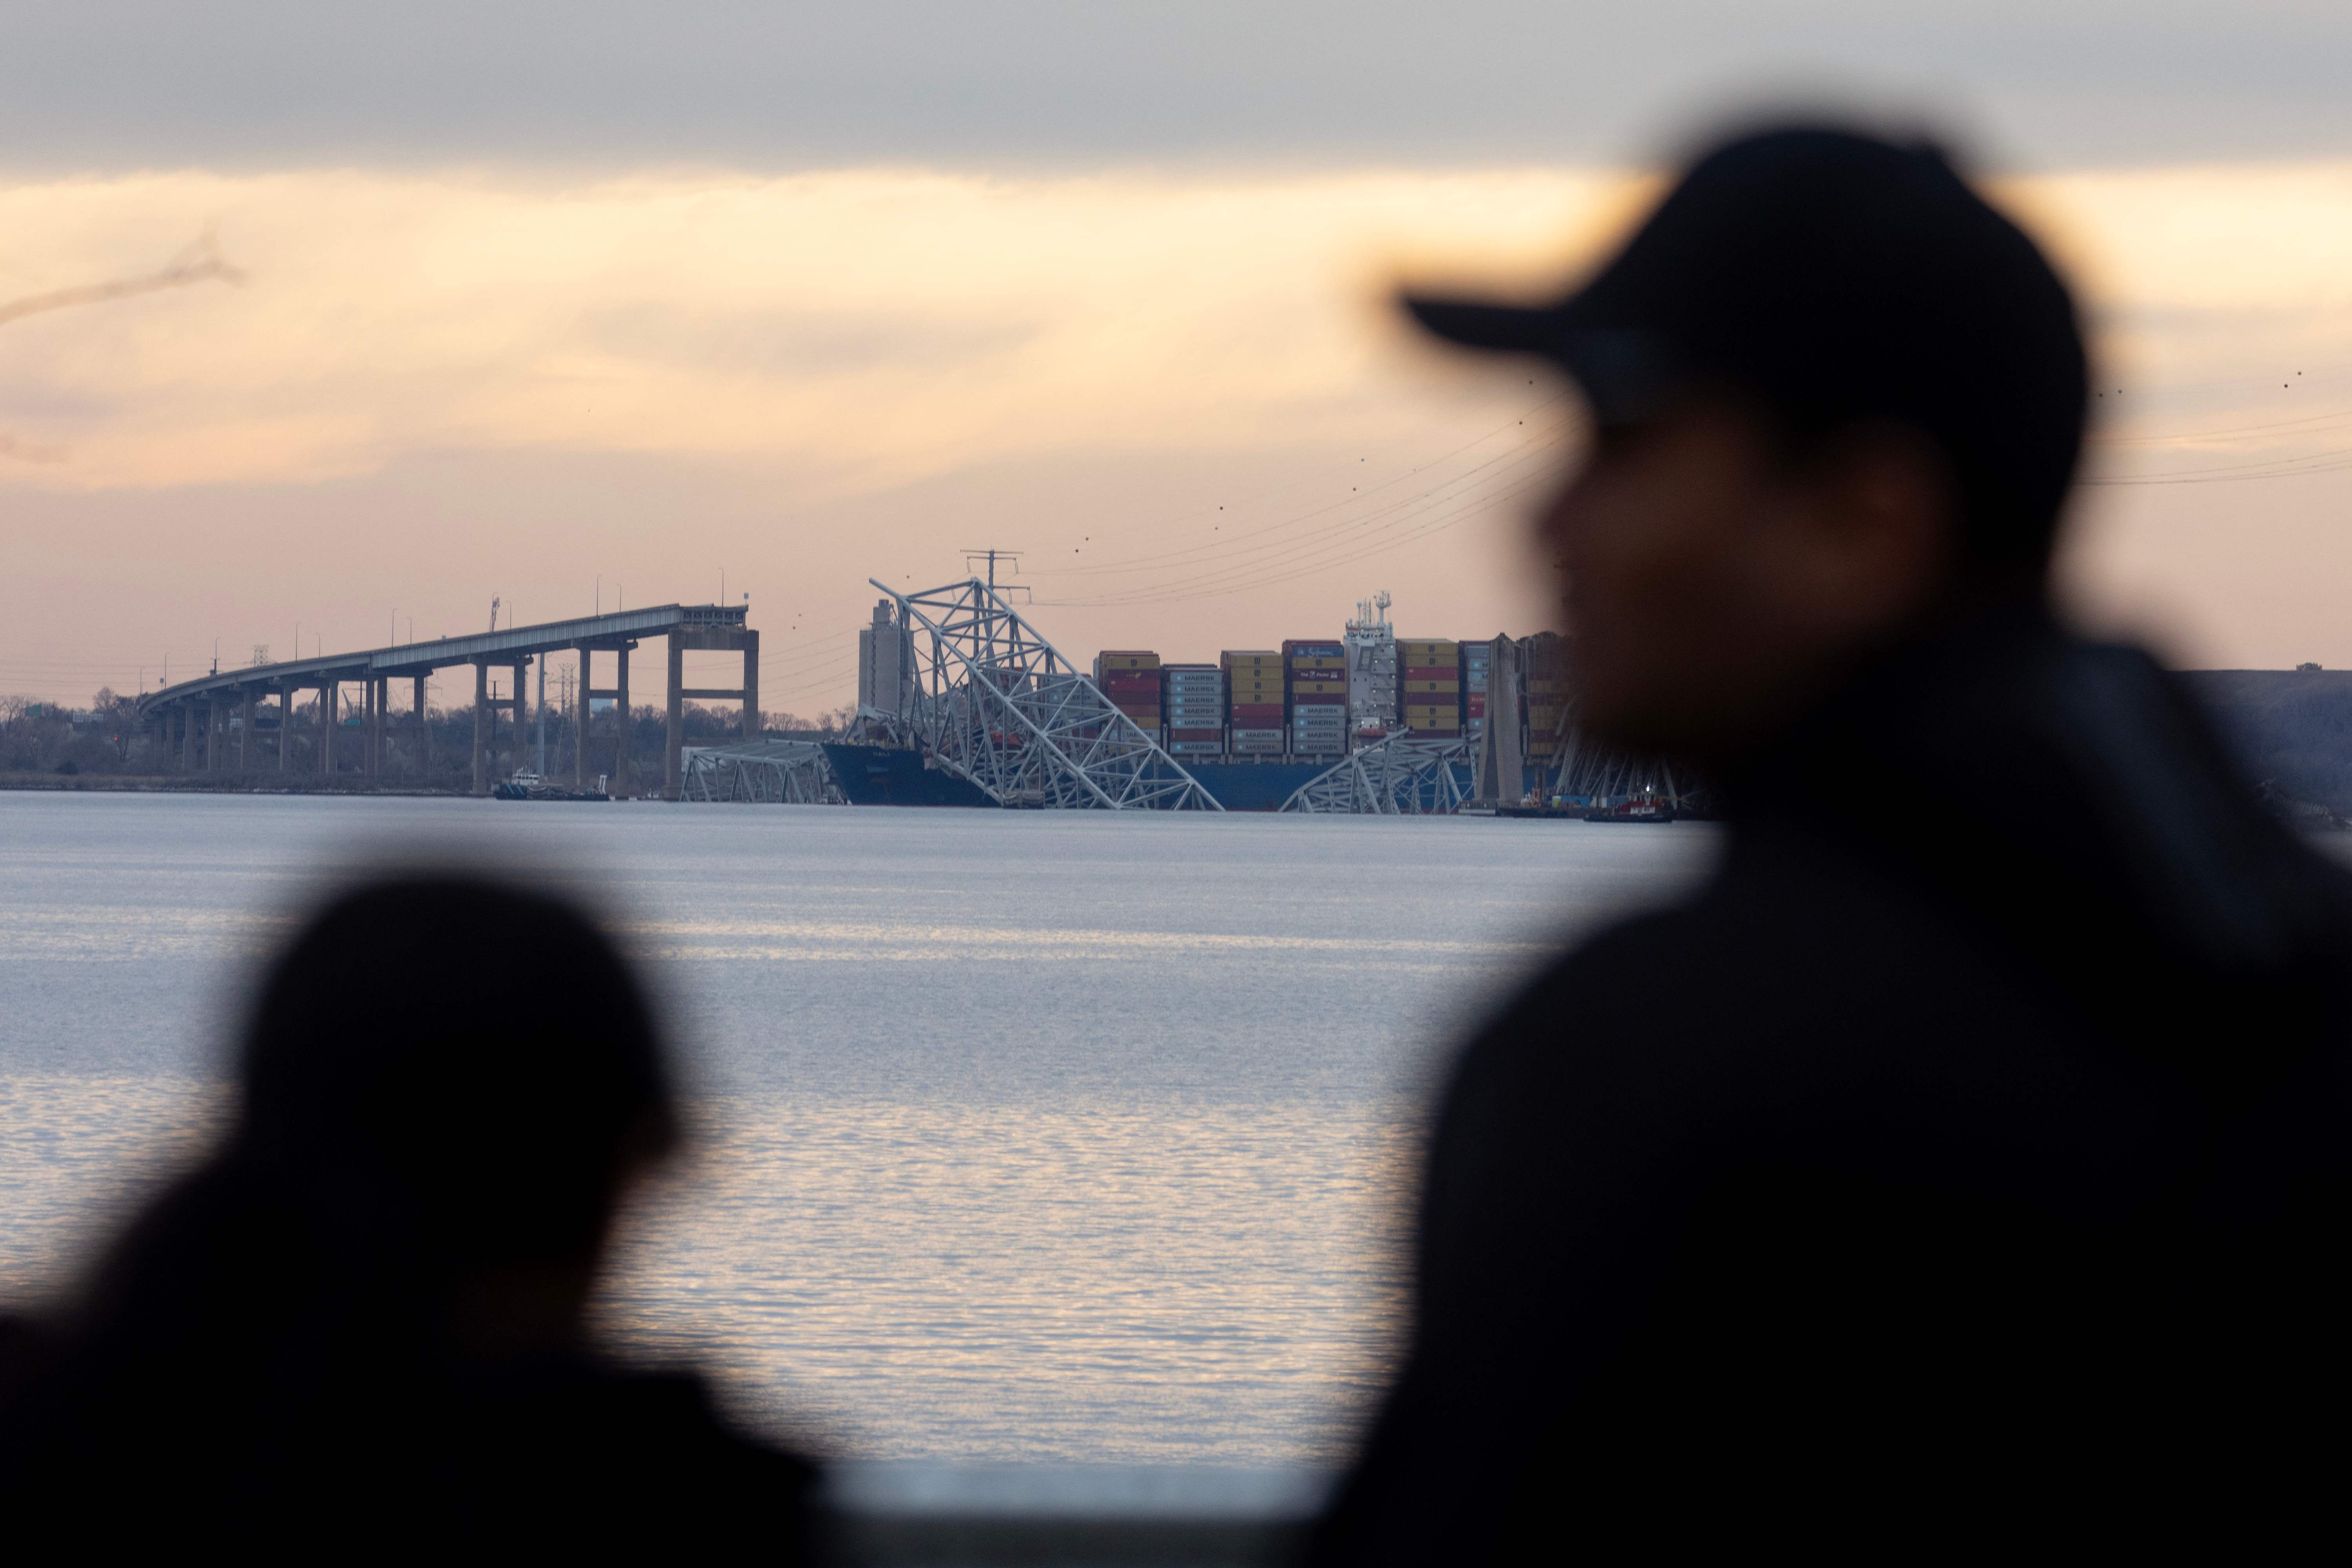 BALTIMORE, MARYLAND - MARCH 28: People watch as the sun descends beyond the collapsed Francis Scott Key Bridge on March 28, 2024 in Baltimore, Maryland. The bridge, used by roughly 30,000 vehicles each day, fell into the Patapsco River after being struck by the Dali, a cargo ship leaving the Port of Baltimore at around 1:30 a.m. Tuesday morning. The bodies of two men who were on the bridge at the time of the accident have been recovered from the water, with four others still missing and presumed dead and two others rescued and treated for injuries shortly after the accident. The Port of Baltimore, one of the largest and busiest on the East Coast of the U.S., is temporarily closed.   Scott Olson/Getty Images/AFP (Photo by SCOTT OLSON / GETTY IMAGES NORTH AMERICA / Getty Images via AFP)